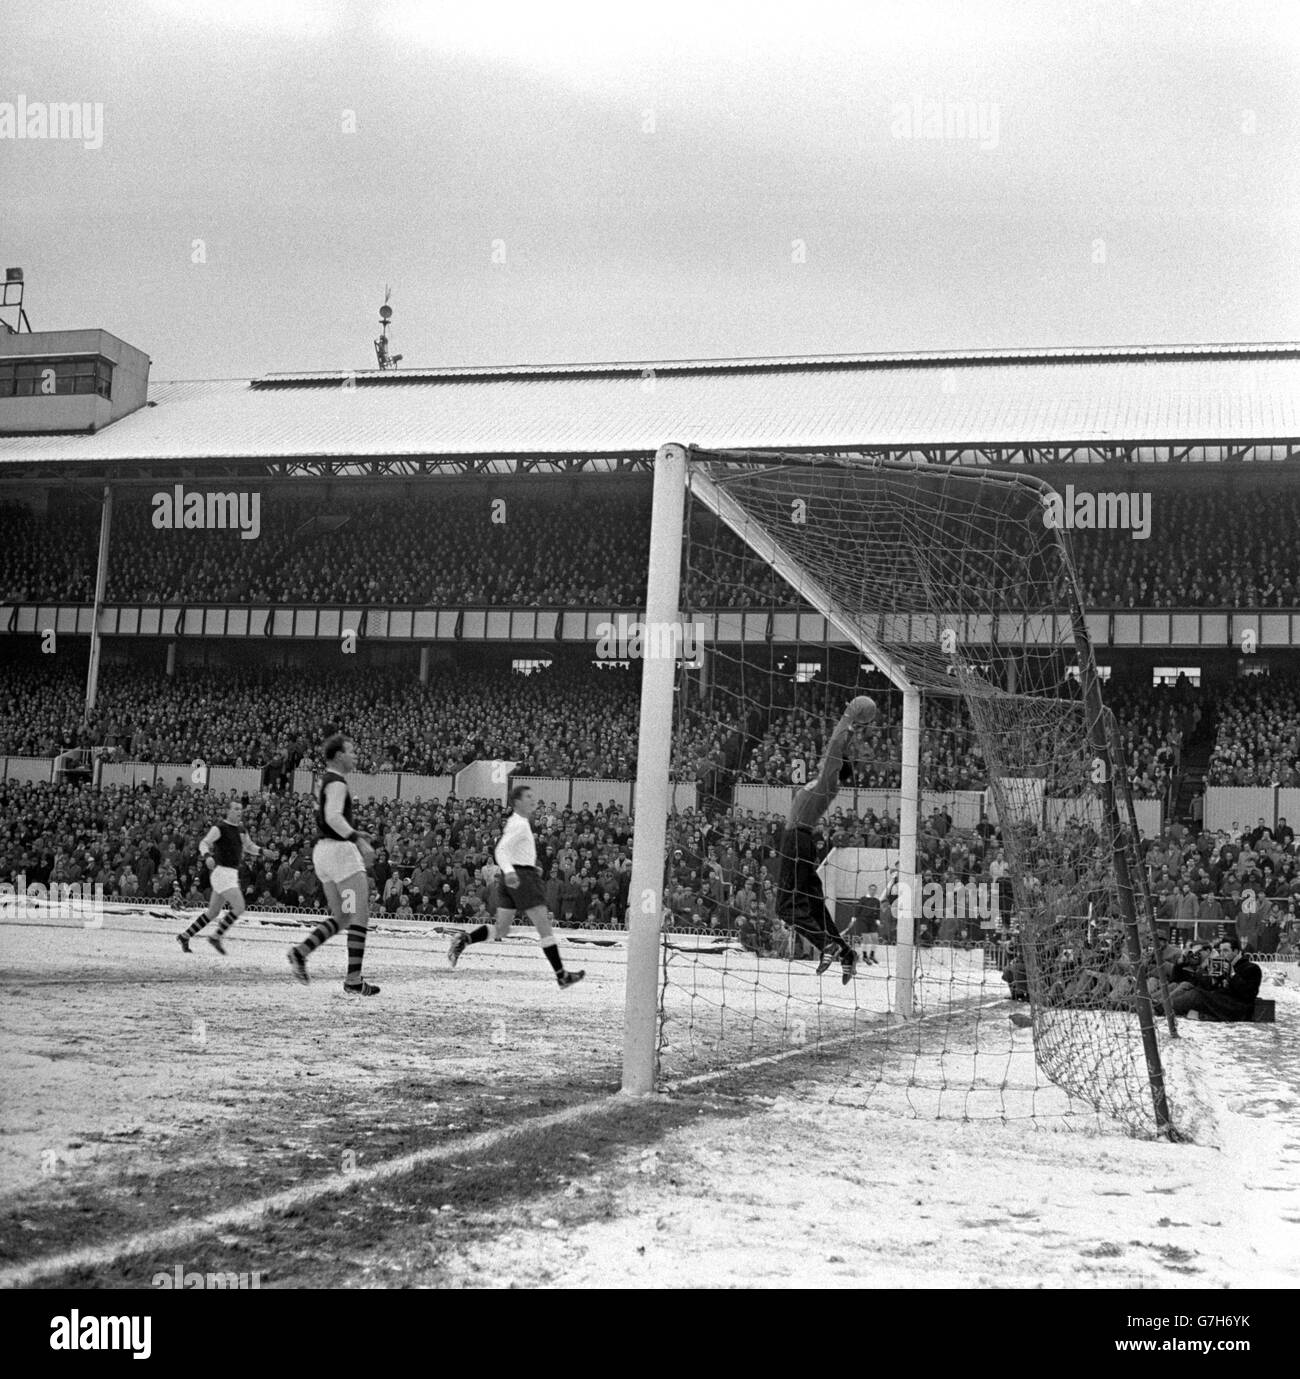 Tottenham Hotspur goalkeeper Bill Brown, wearing a tracksuit against the cold, jumps high and makes a clean save watched by Burnley centre-forward Andy Lochhead (second from left) during the delayed FA Cup third round tie in the snow at White Hart Lane. The match kicked off early at 2.15pm due to the advice of the local Electricity Board office, in light of the current power difficulties. Stock Photo